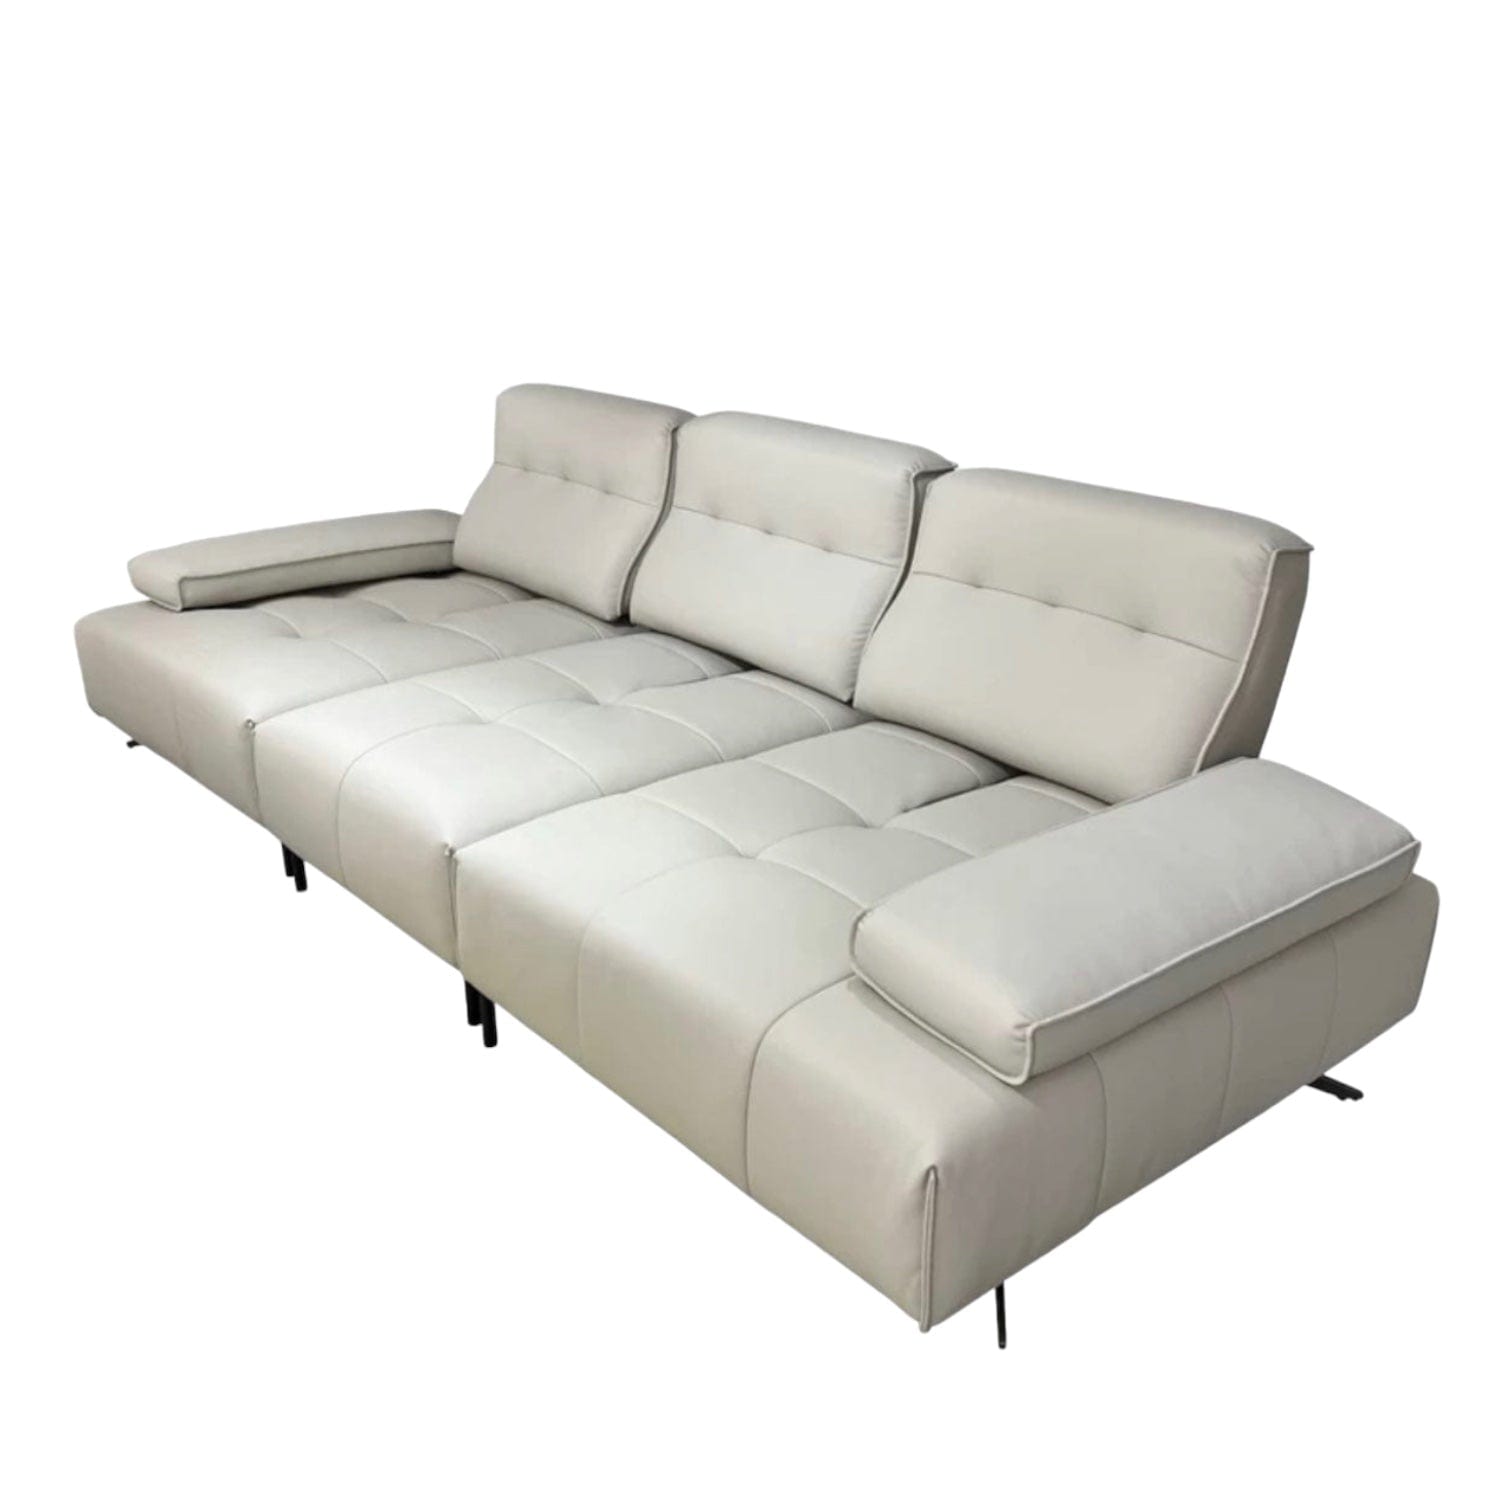 Home Atelier Adele Electric Slider Leather Sofa